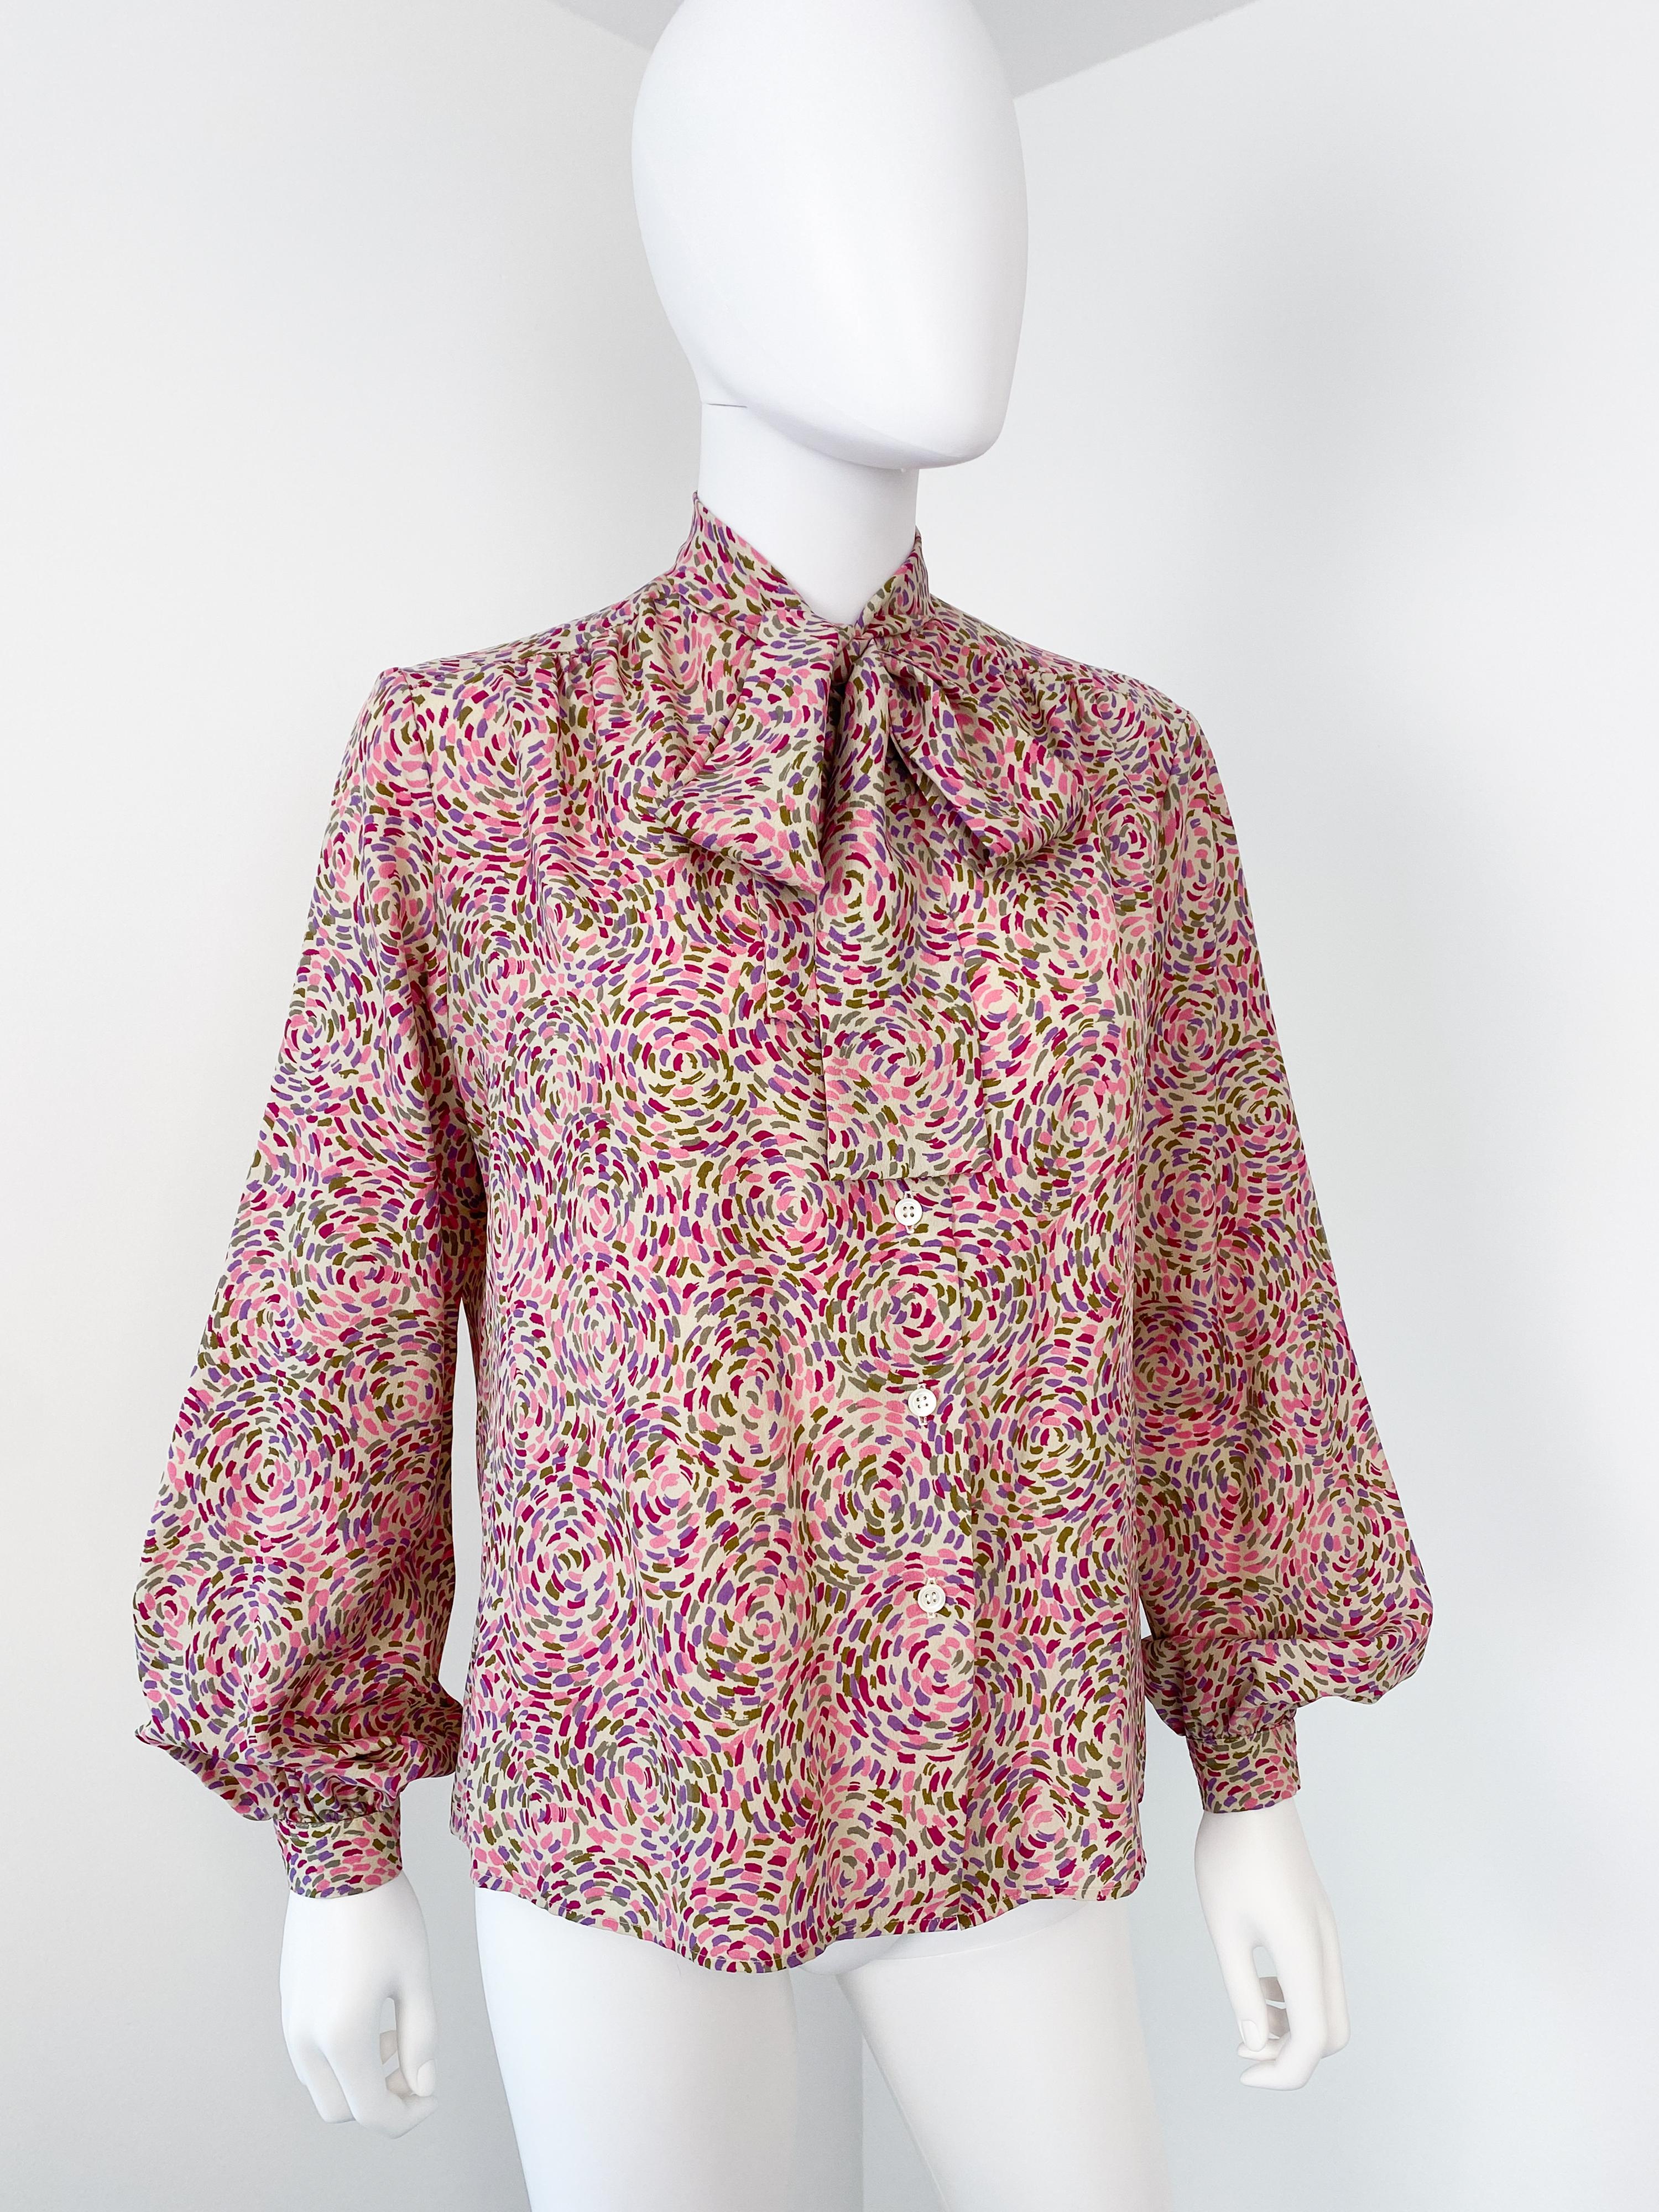 Vintage 1980s Silky Polyester Blouse Top Pink Pointillism Print Size 8 In Excellent Condition For Sale In Atlanta, GA